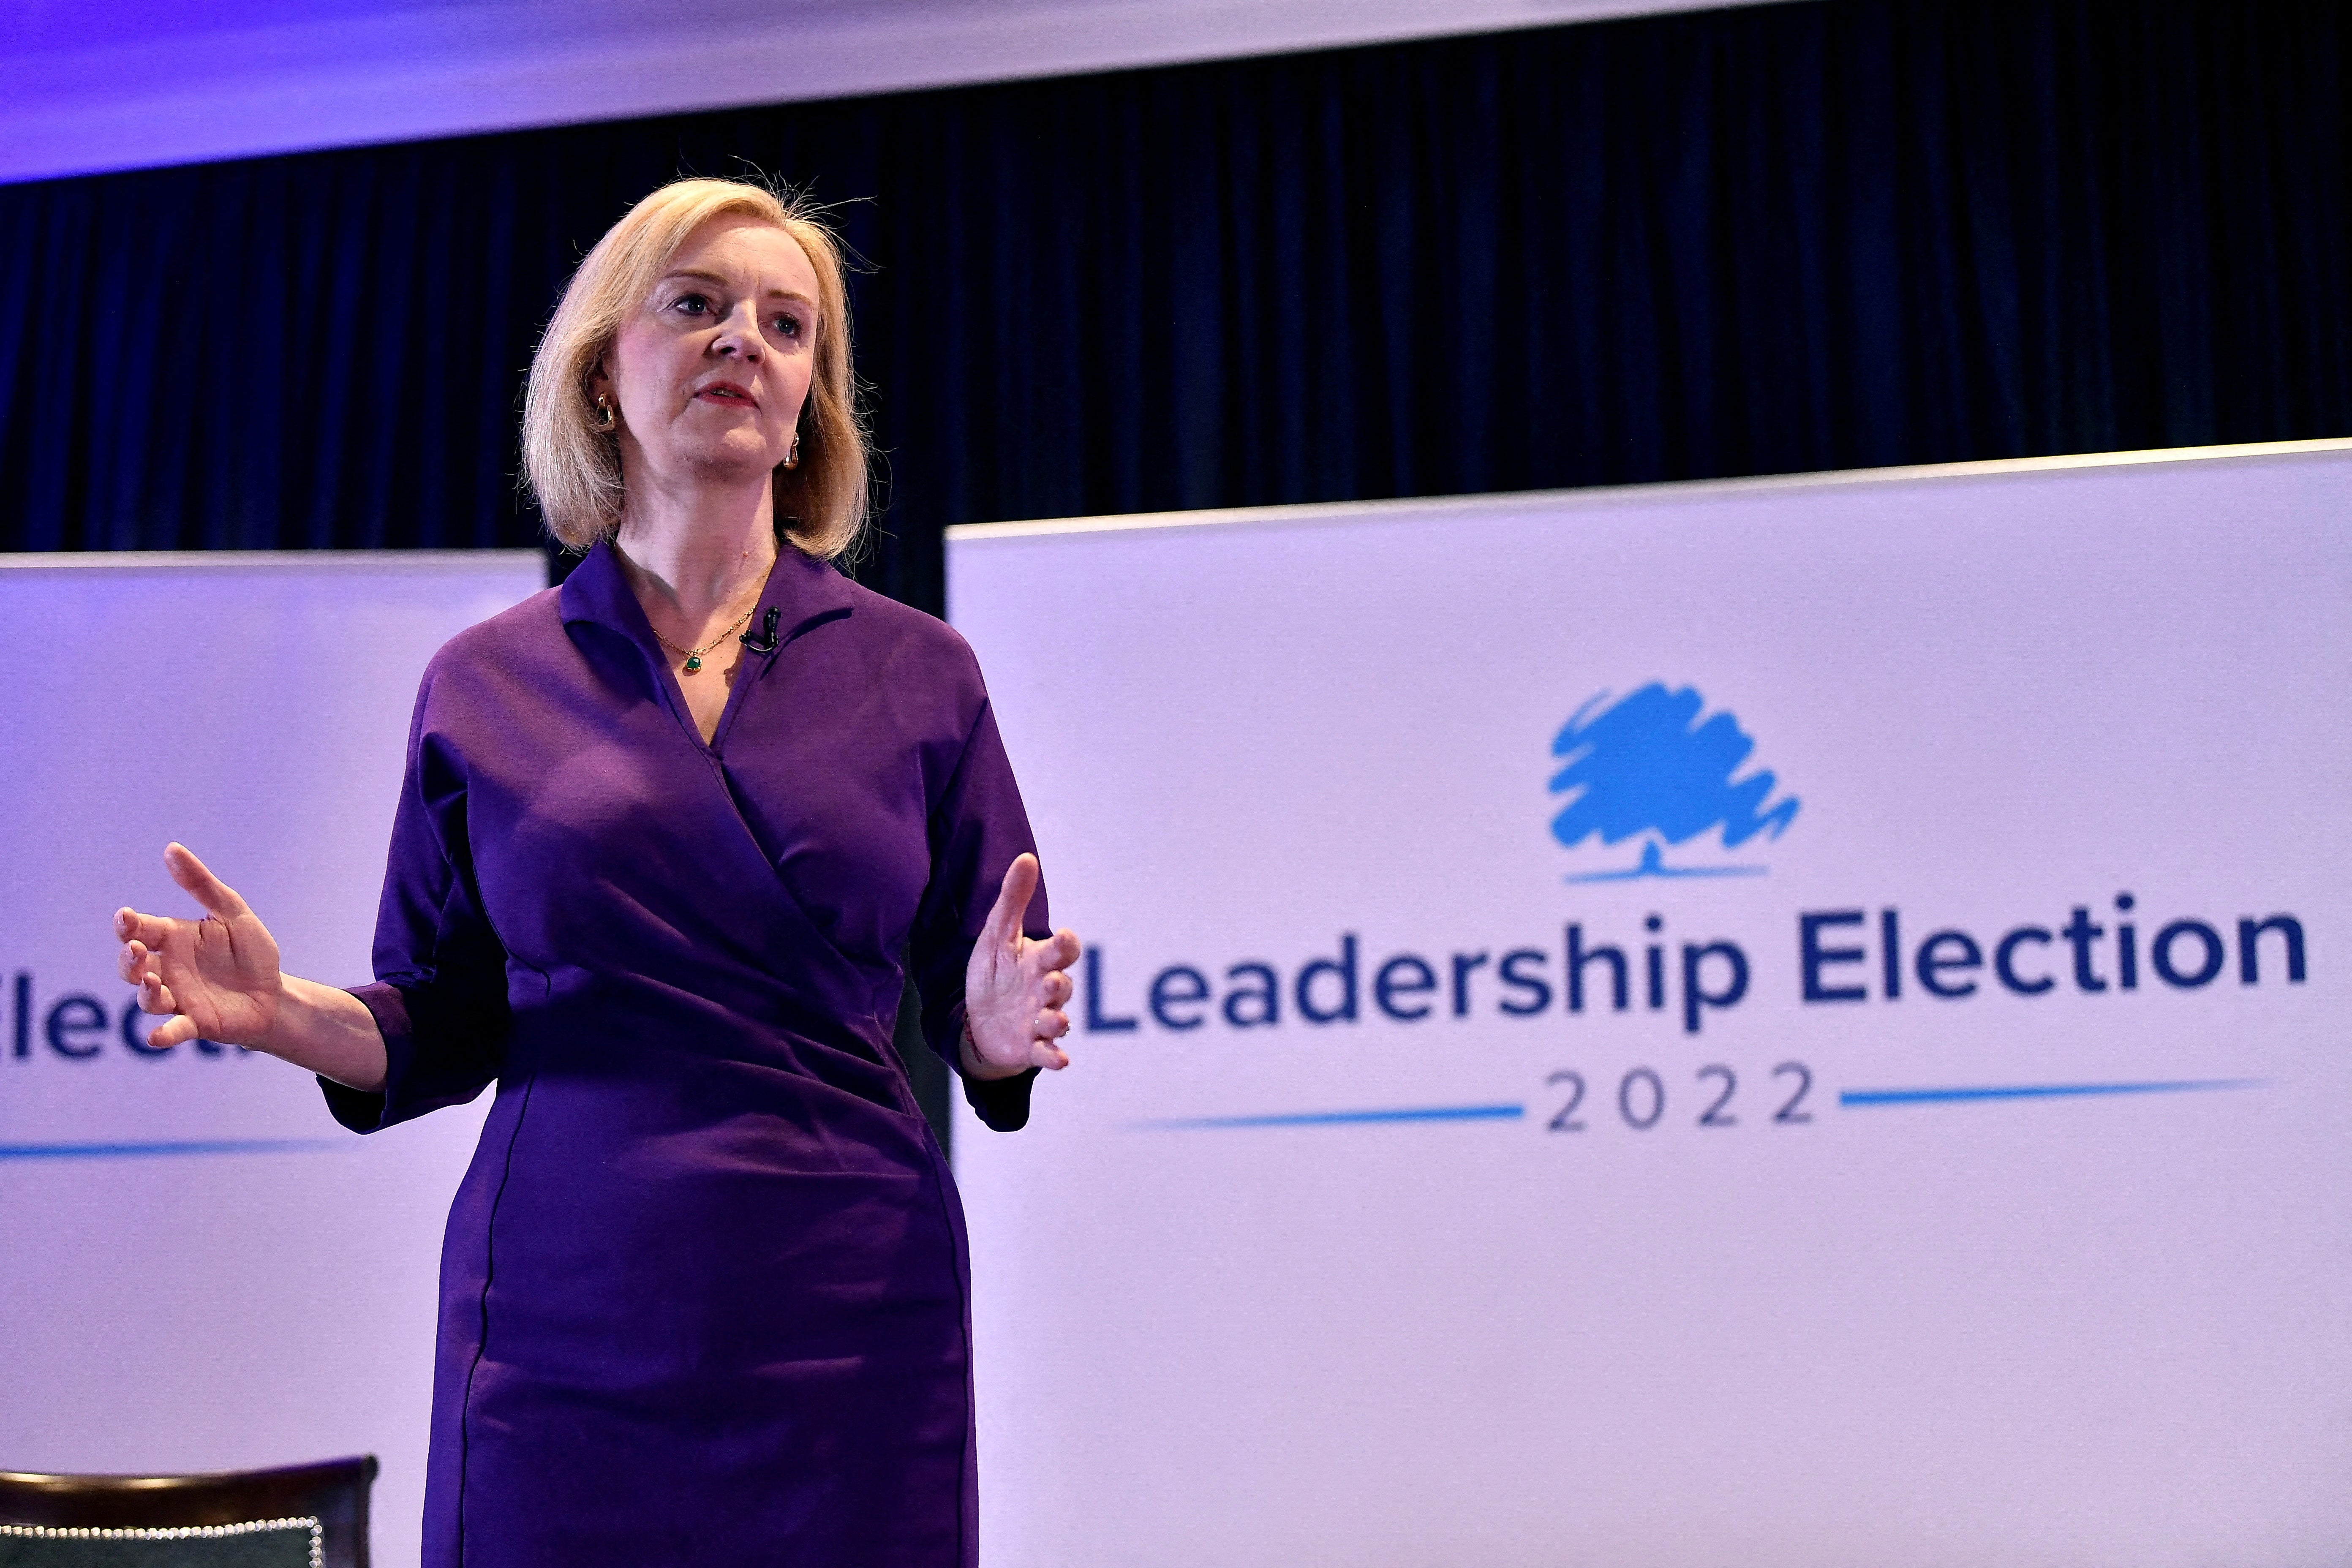 Many of those in the hall in Birmingham will have voted for Truss to be leader